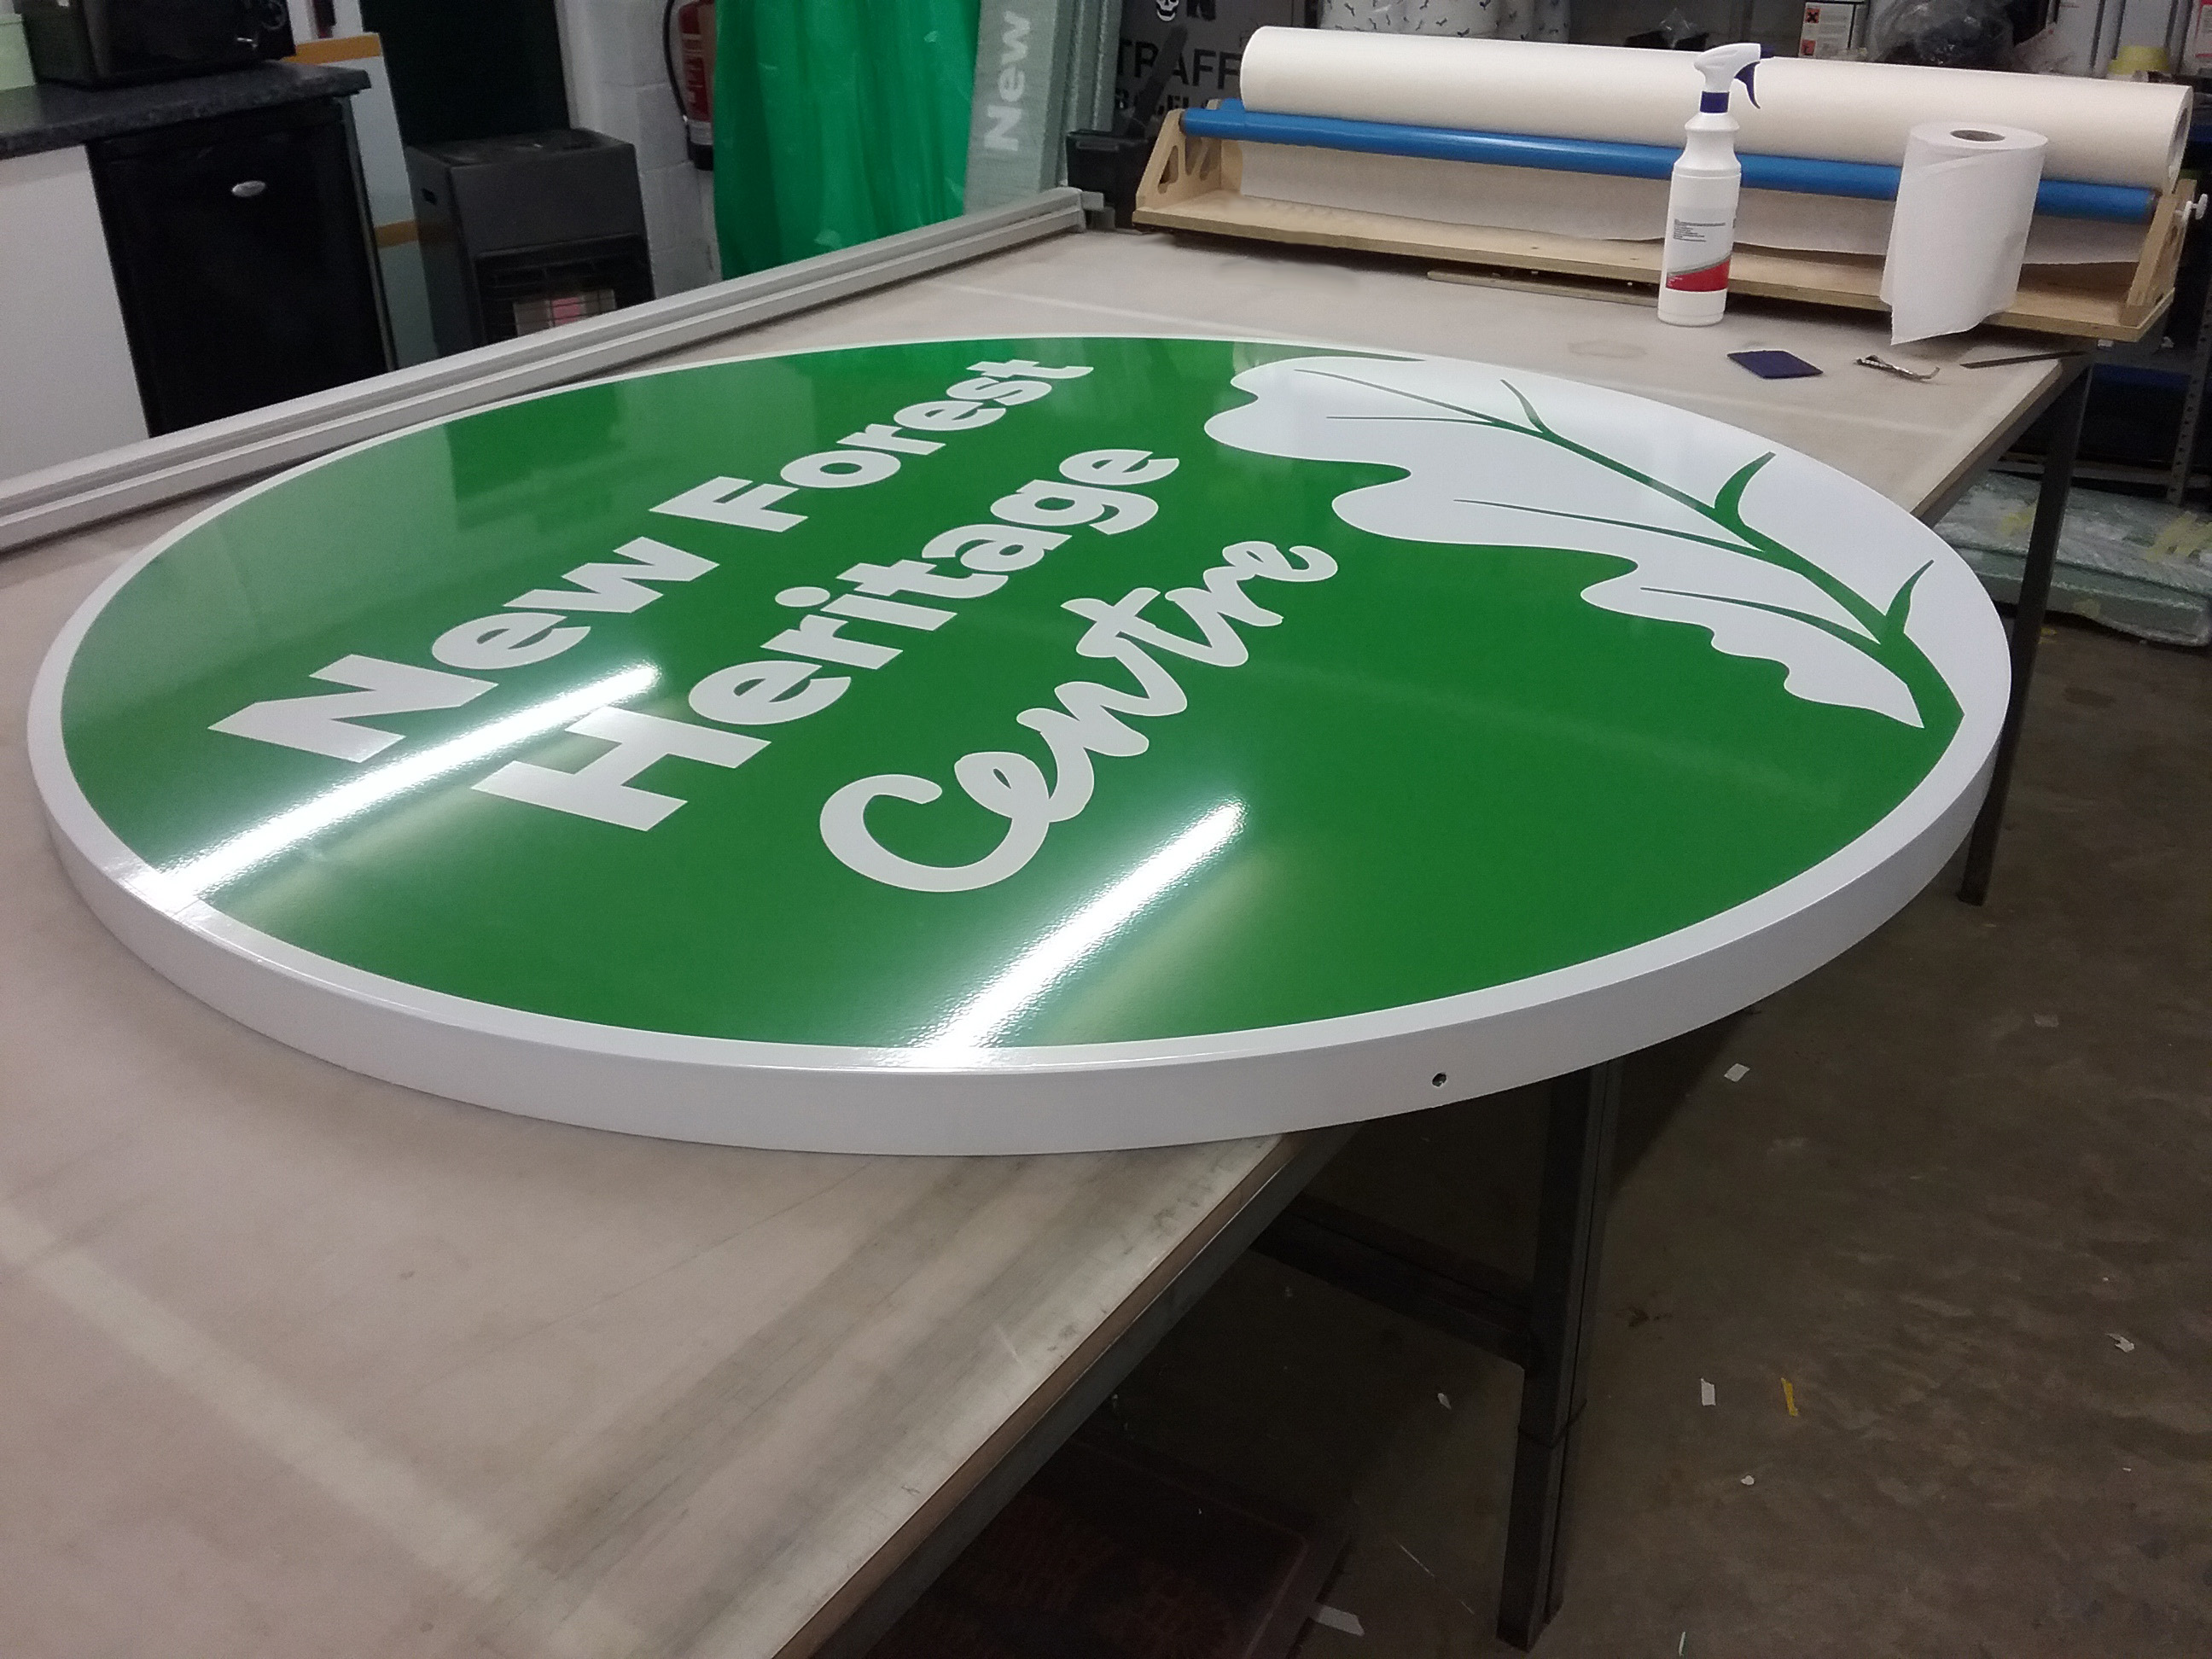 Besoke made circular tray with green vinyl applied to make up company name and decorative leaf design